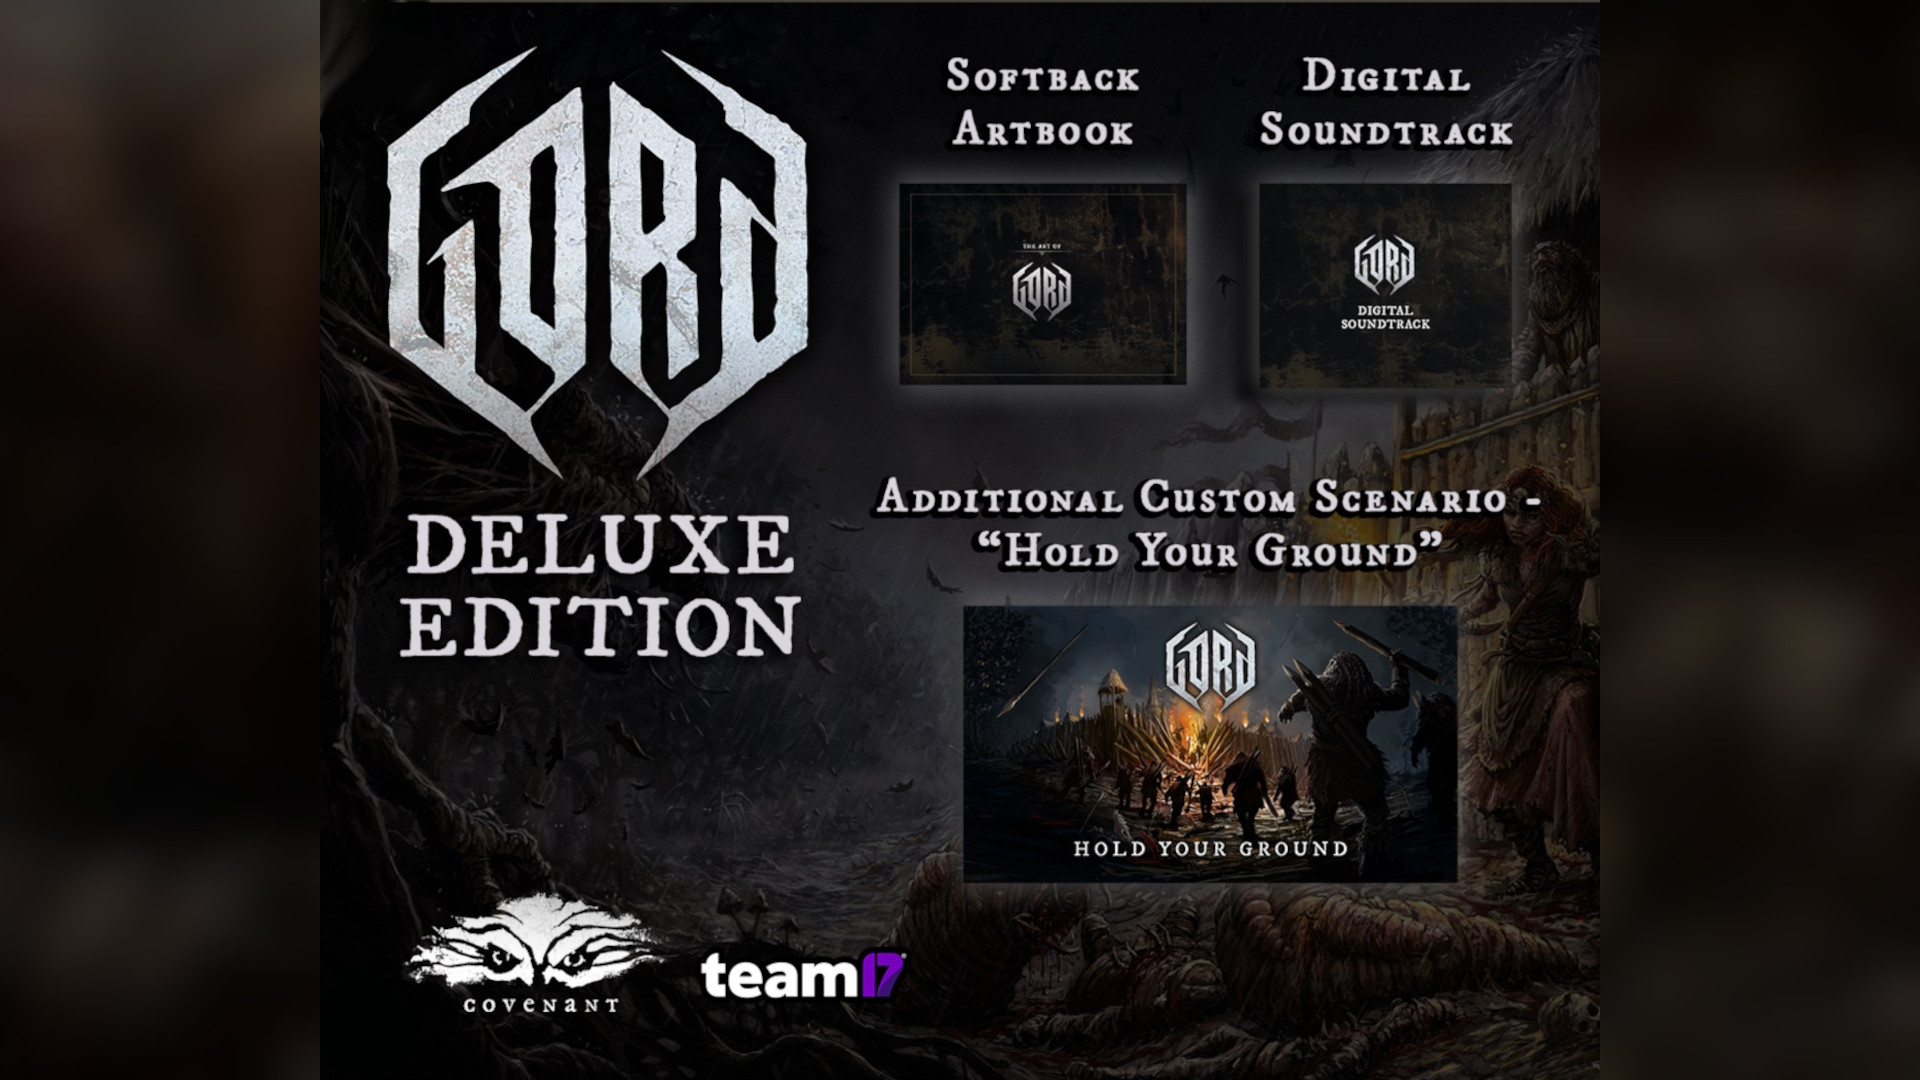 [$ 17.48] Gord Deluxe Edition Steam CD Key